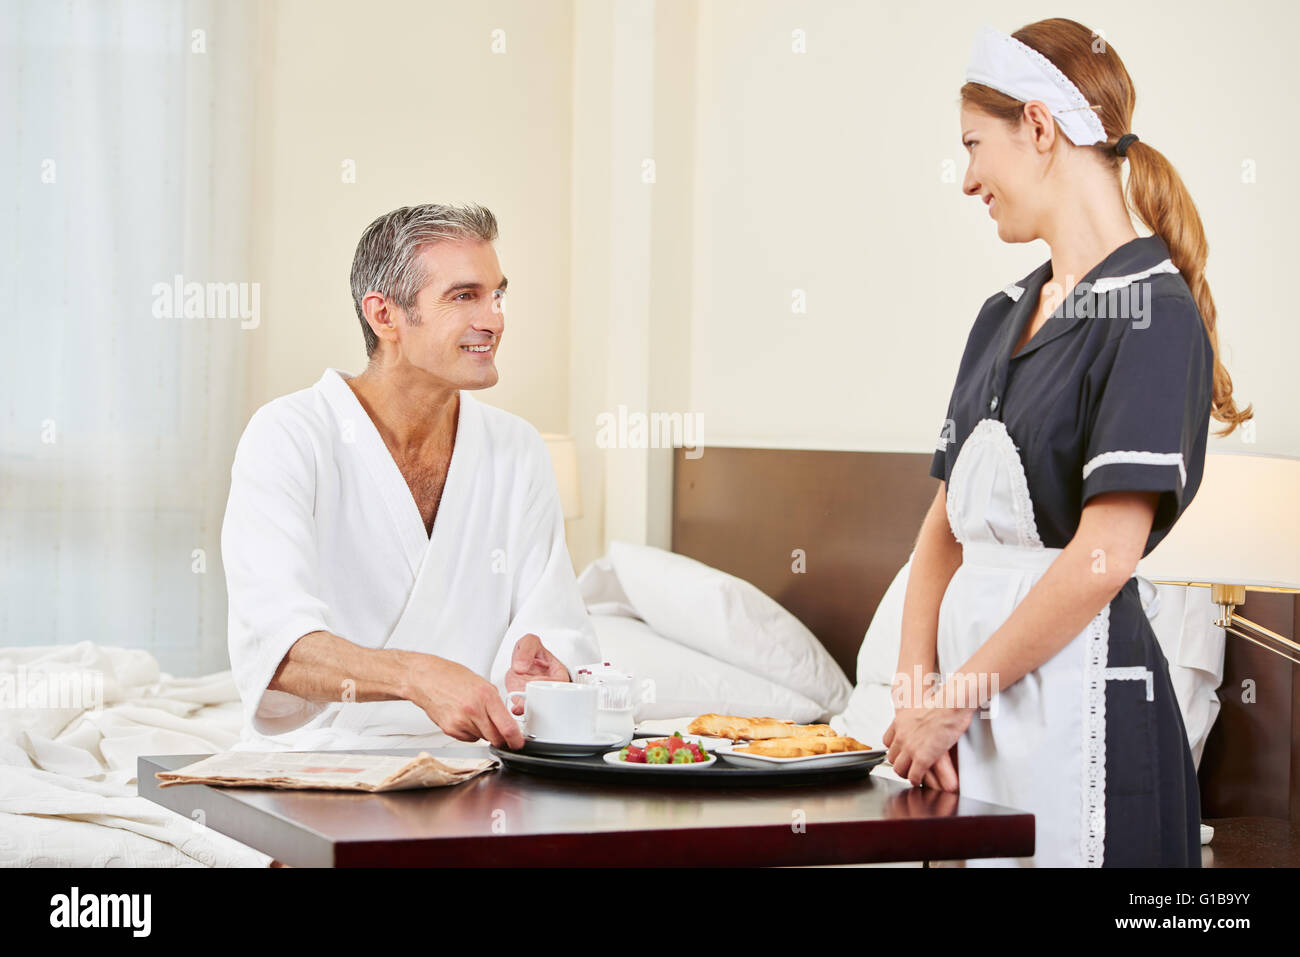 Maid bringing breakfast as room service to man in hotel room Stock Photo